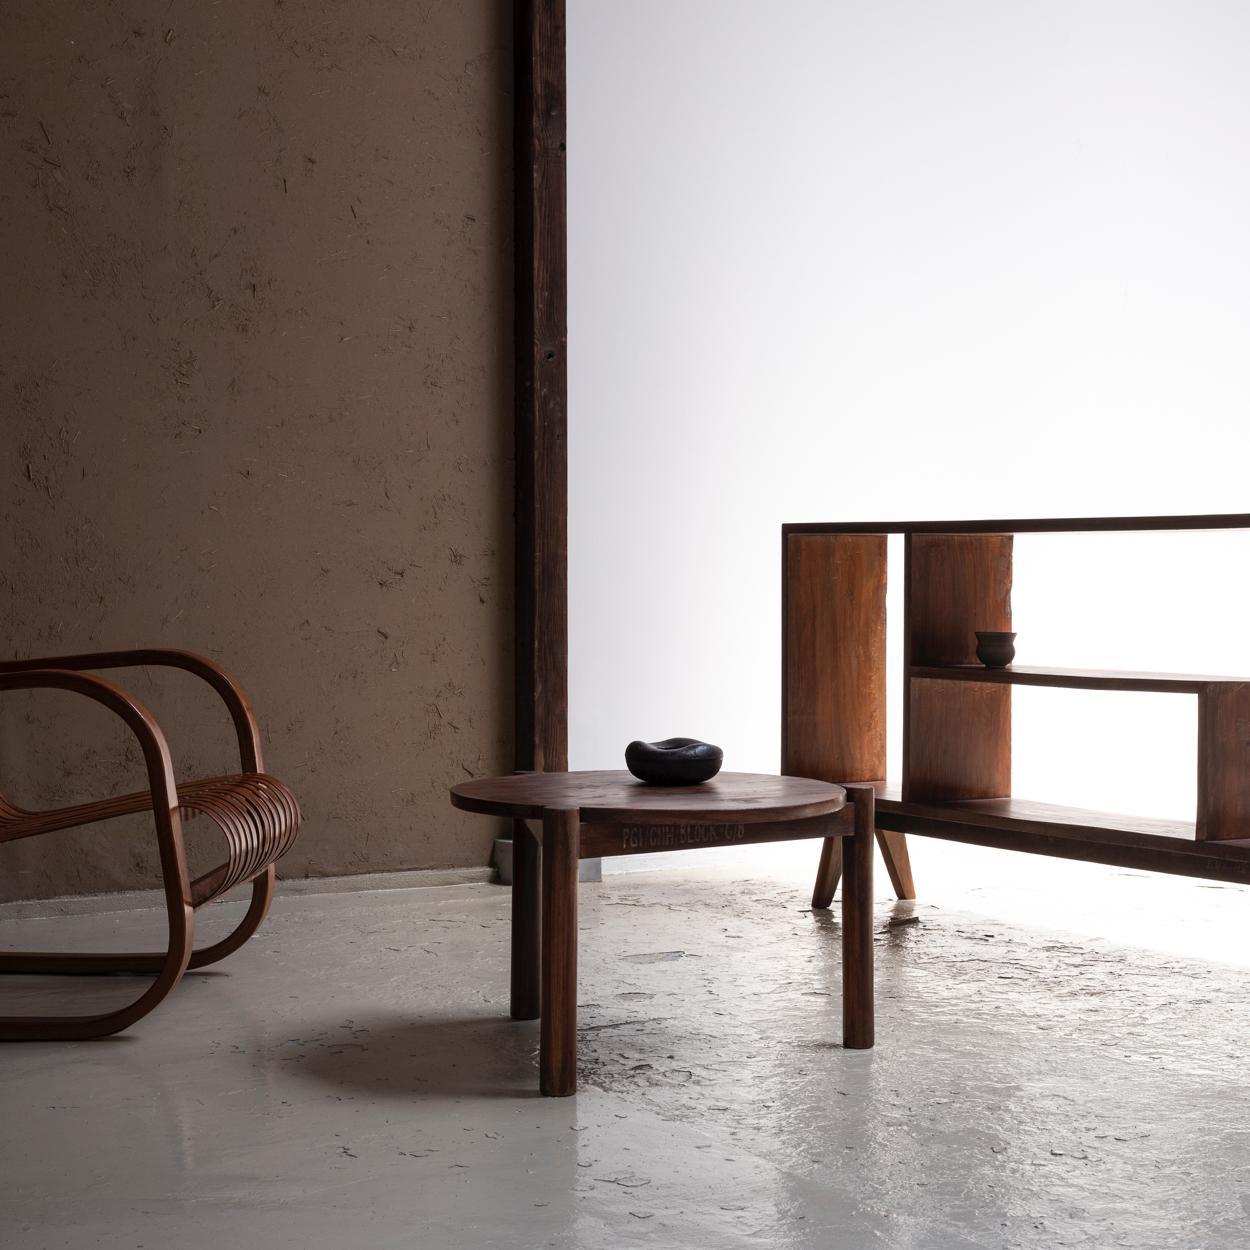 Indian Pierre Jeanneret Coffee Table from Post Graduate Institute, Chandigarh, India